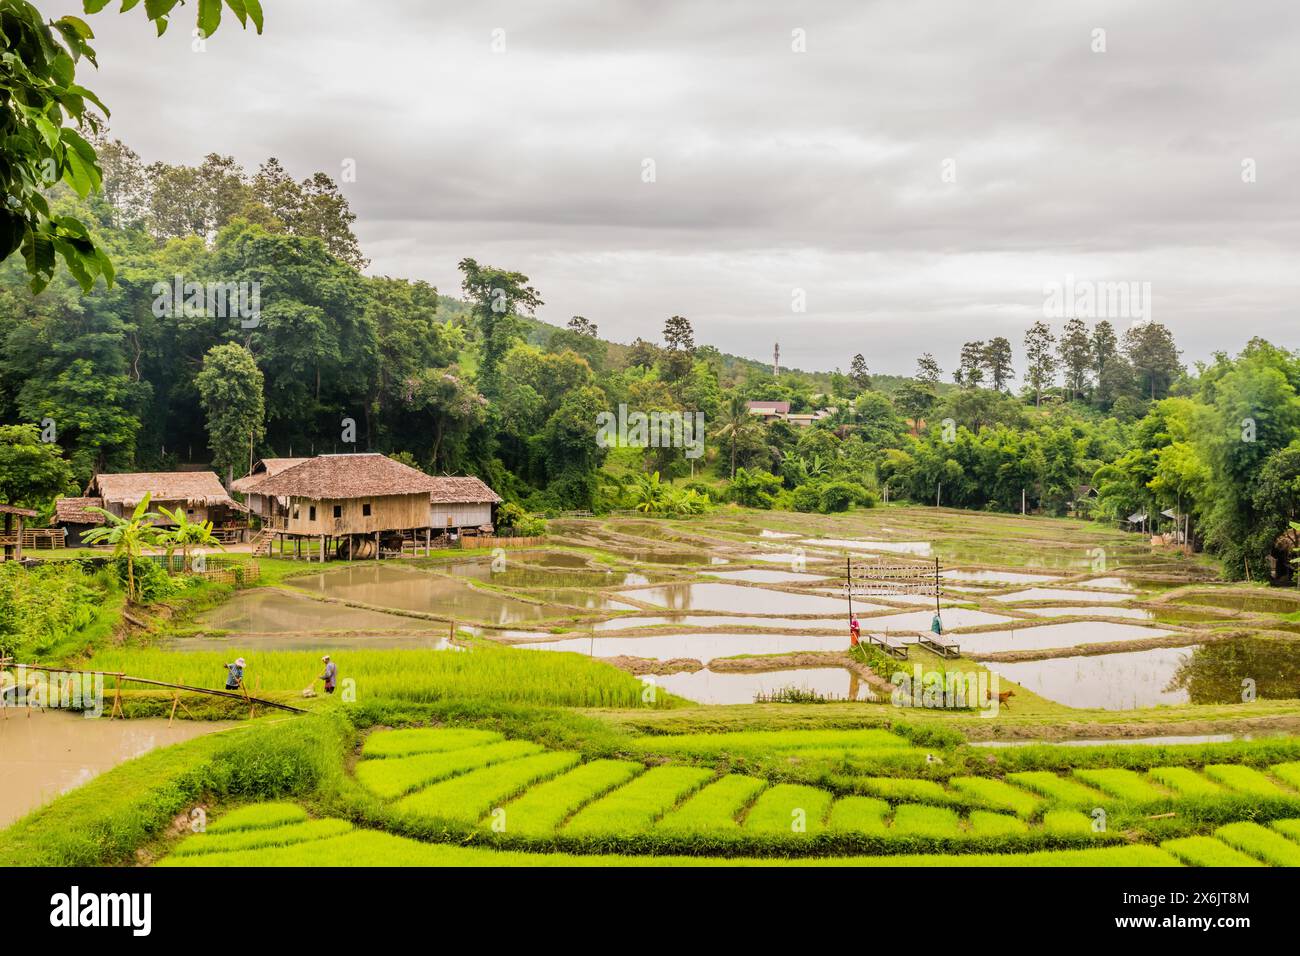 Landscape of Five Hill Tribes Village house and rice paddies with unidentified people working in the fields in Thailand Stock Photo